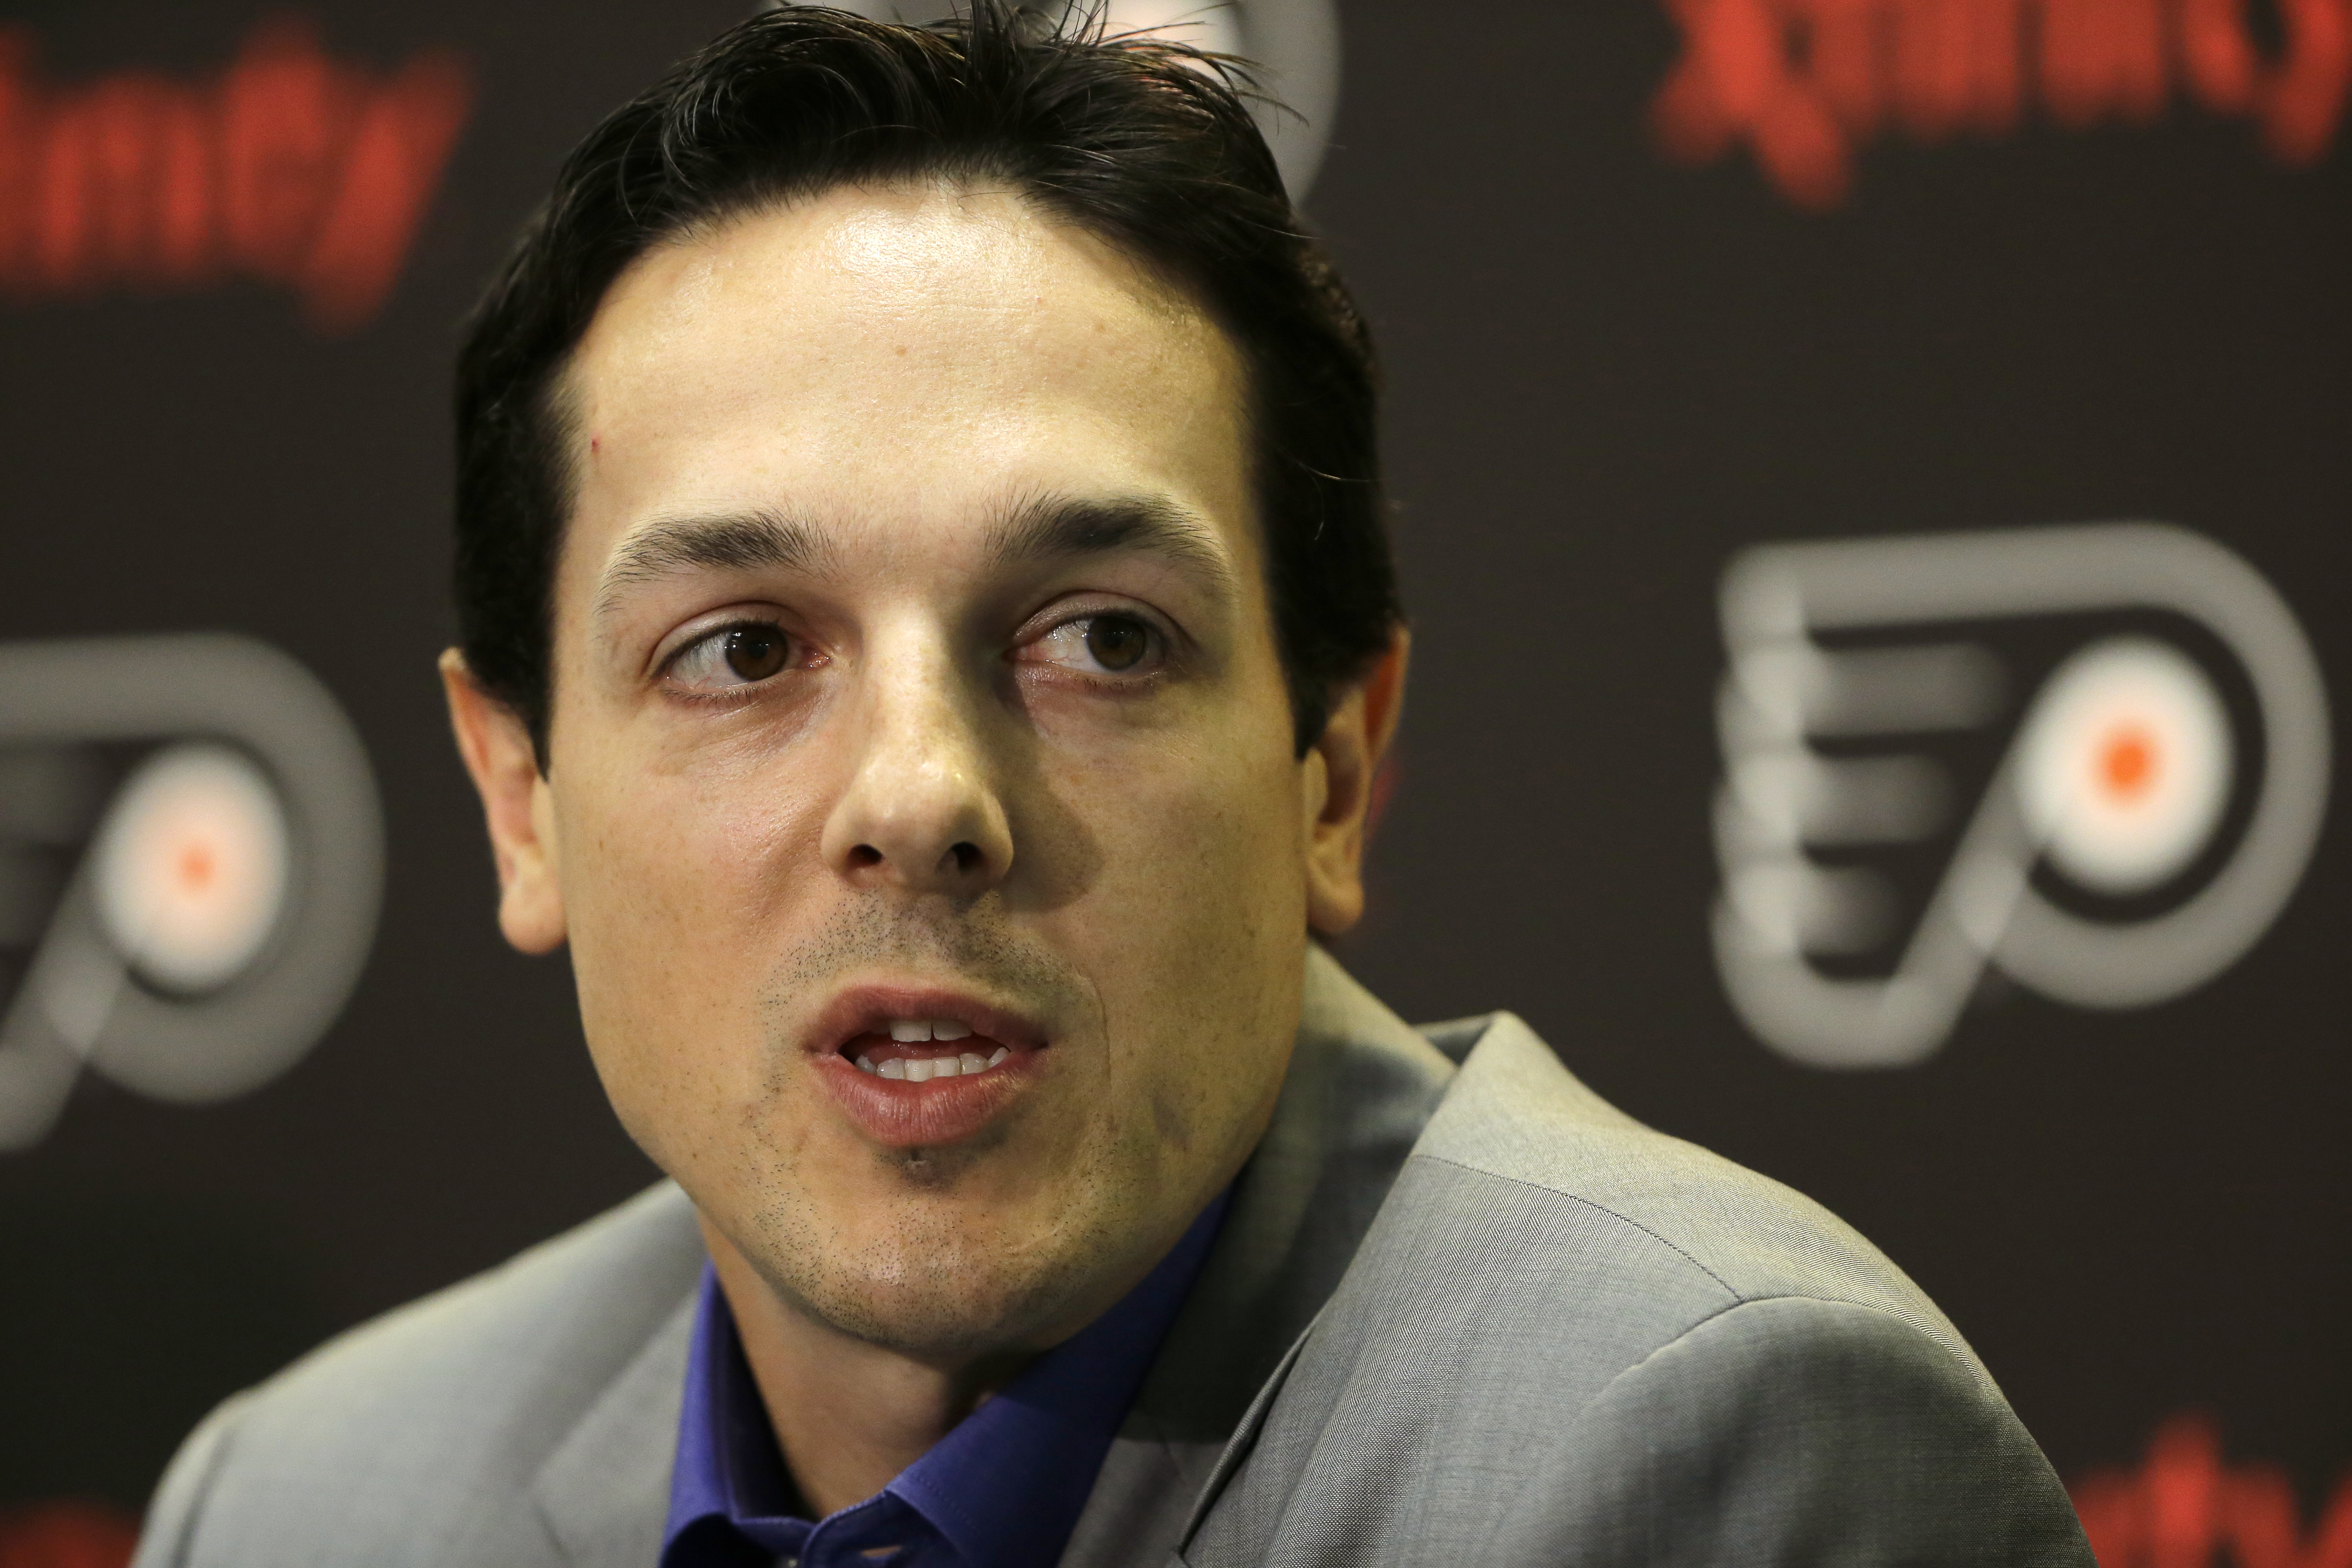 Philadelphia Flyers could be grooming Danny Briere for GM job